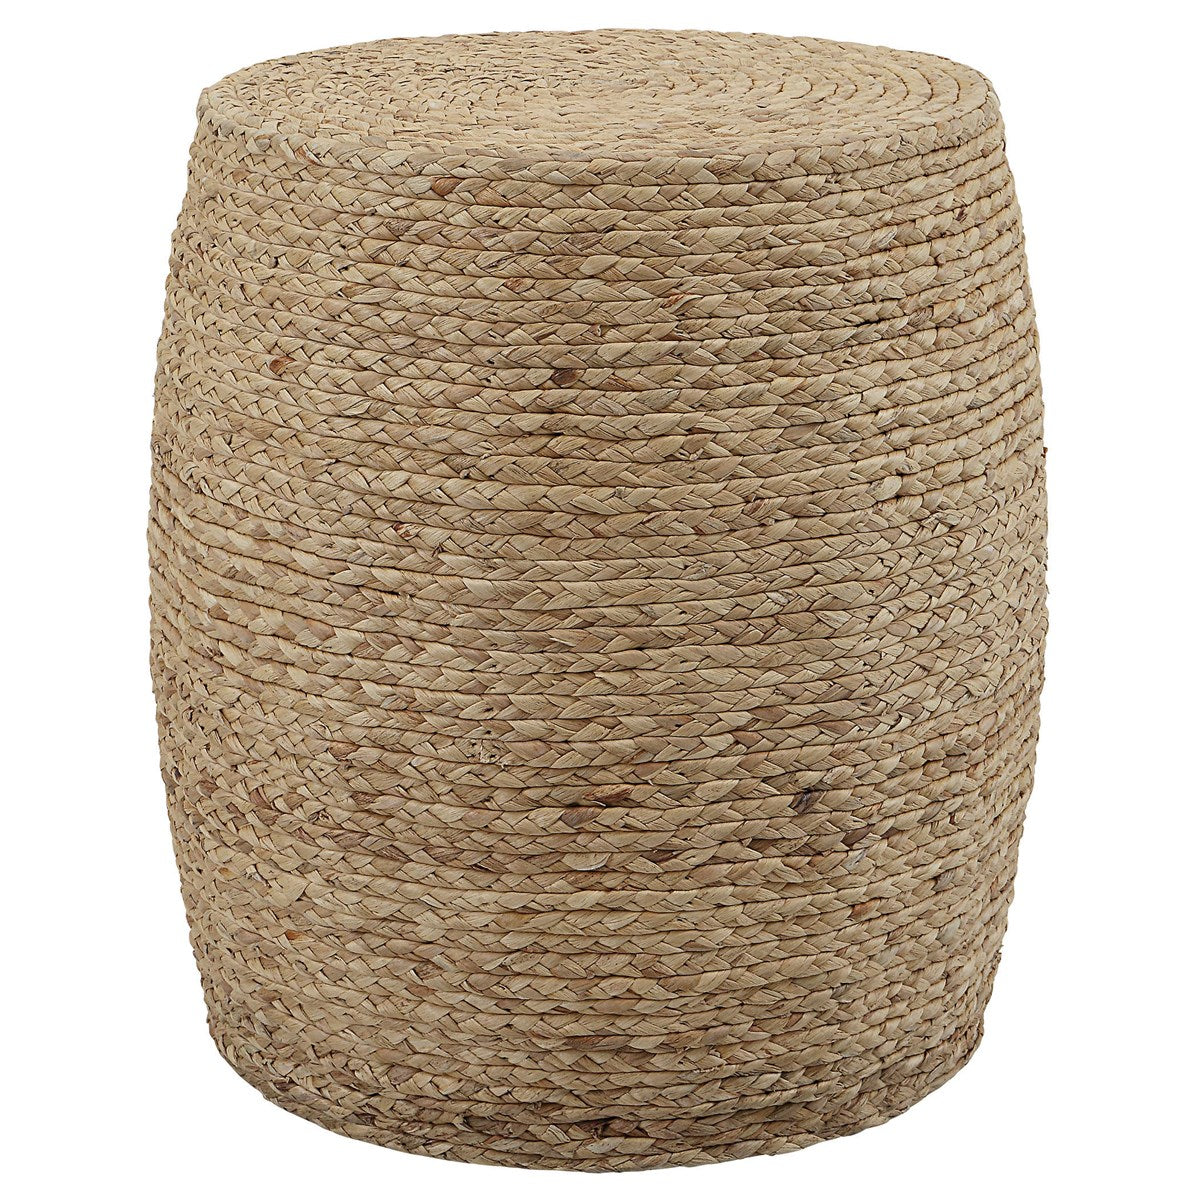 Resort Accent Straw Stool - 19-in - Mellow Monkey